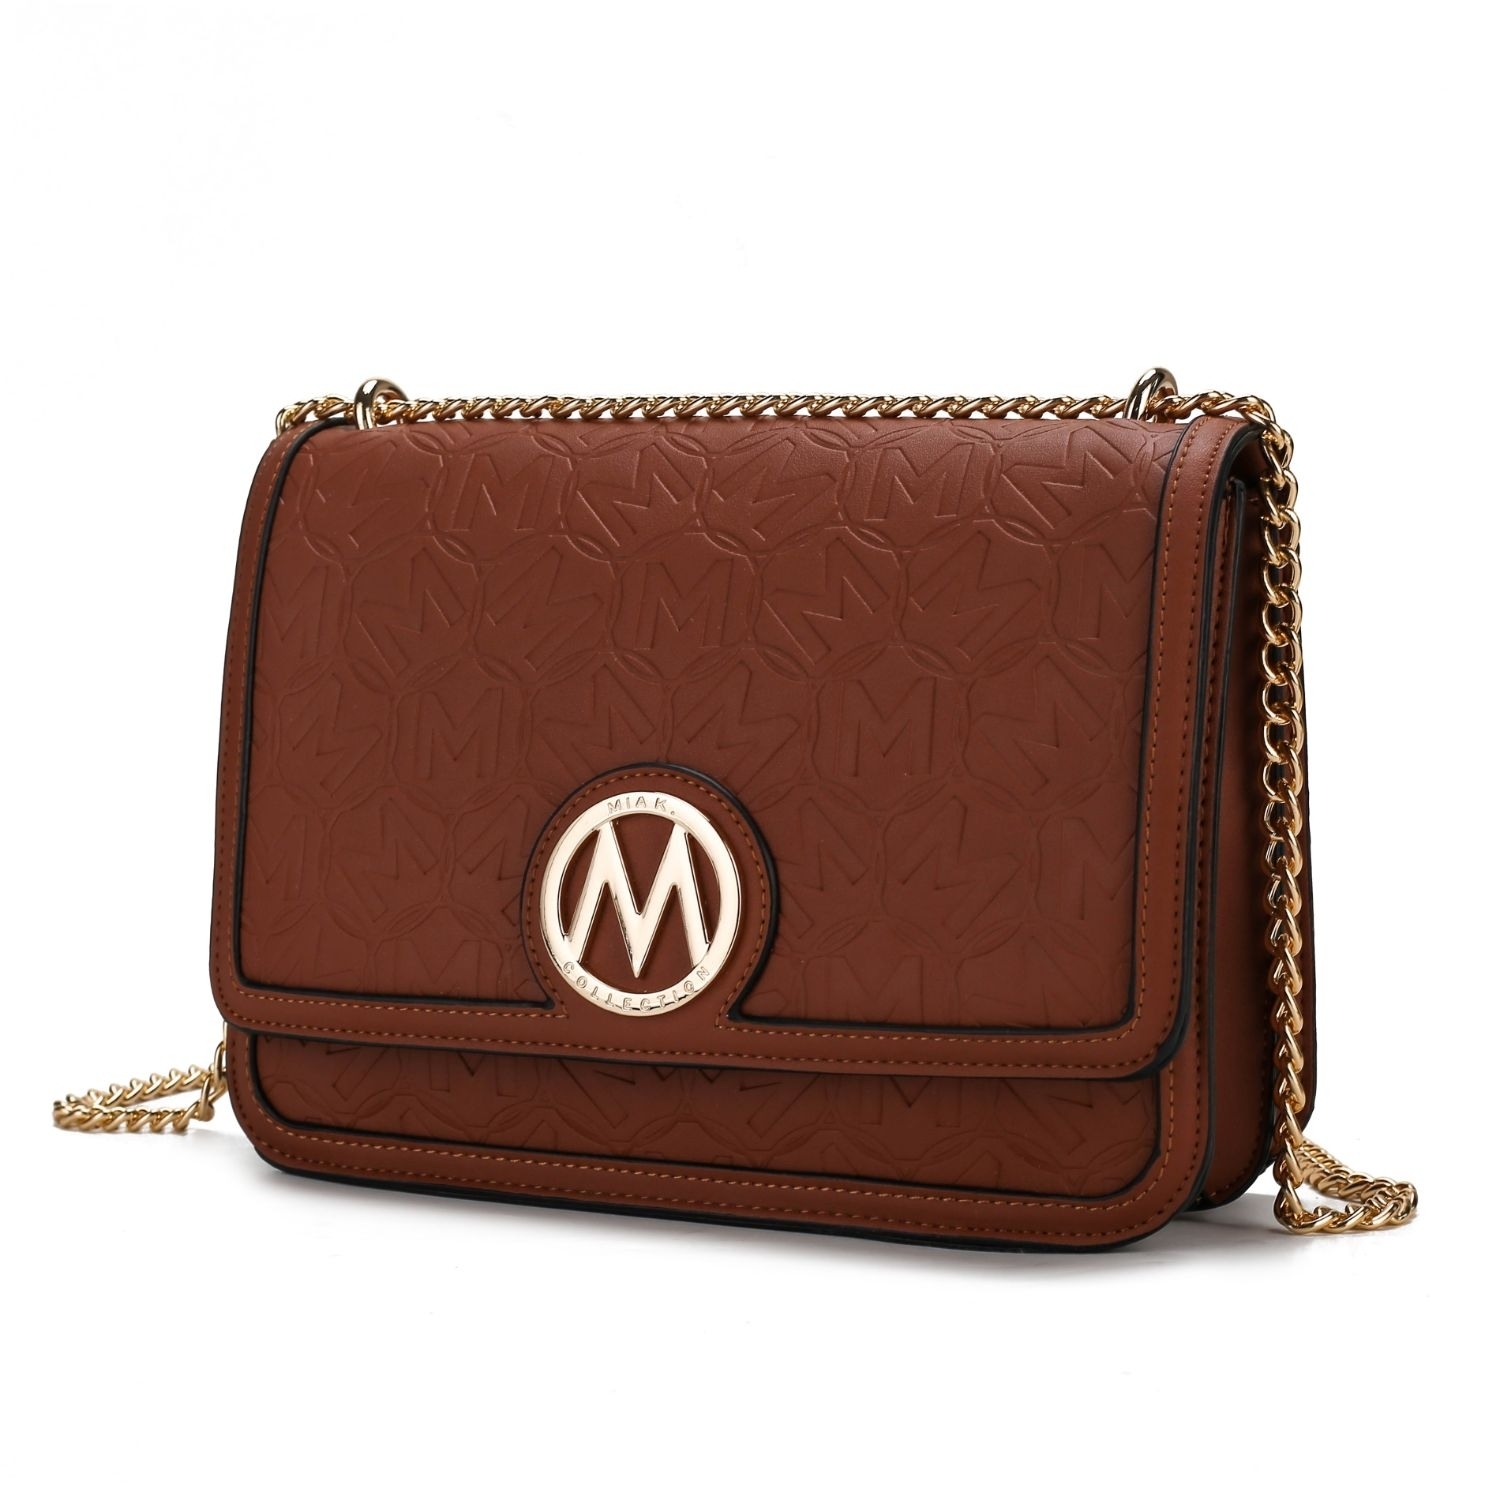 MKF Collection Amiyah Vegan Leather Women's Shoulder Bag By Mia K - Brown